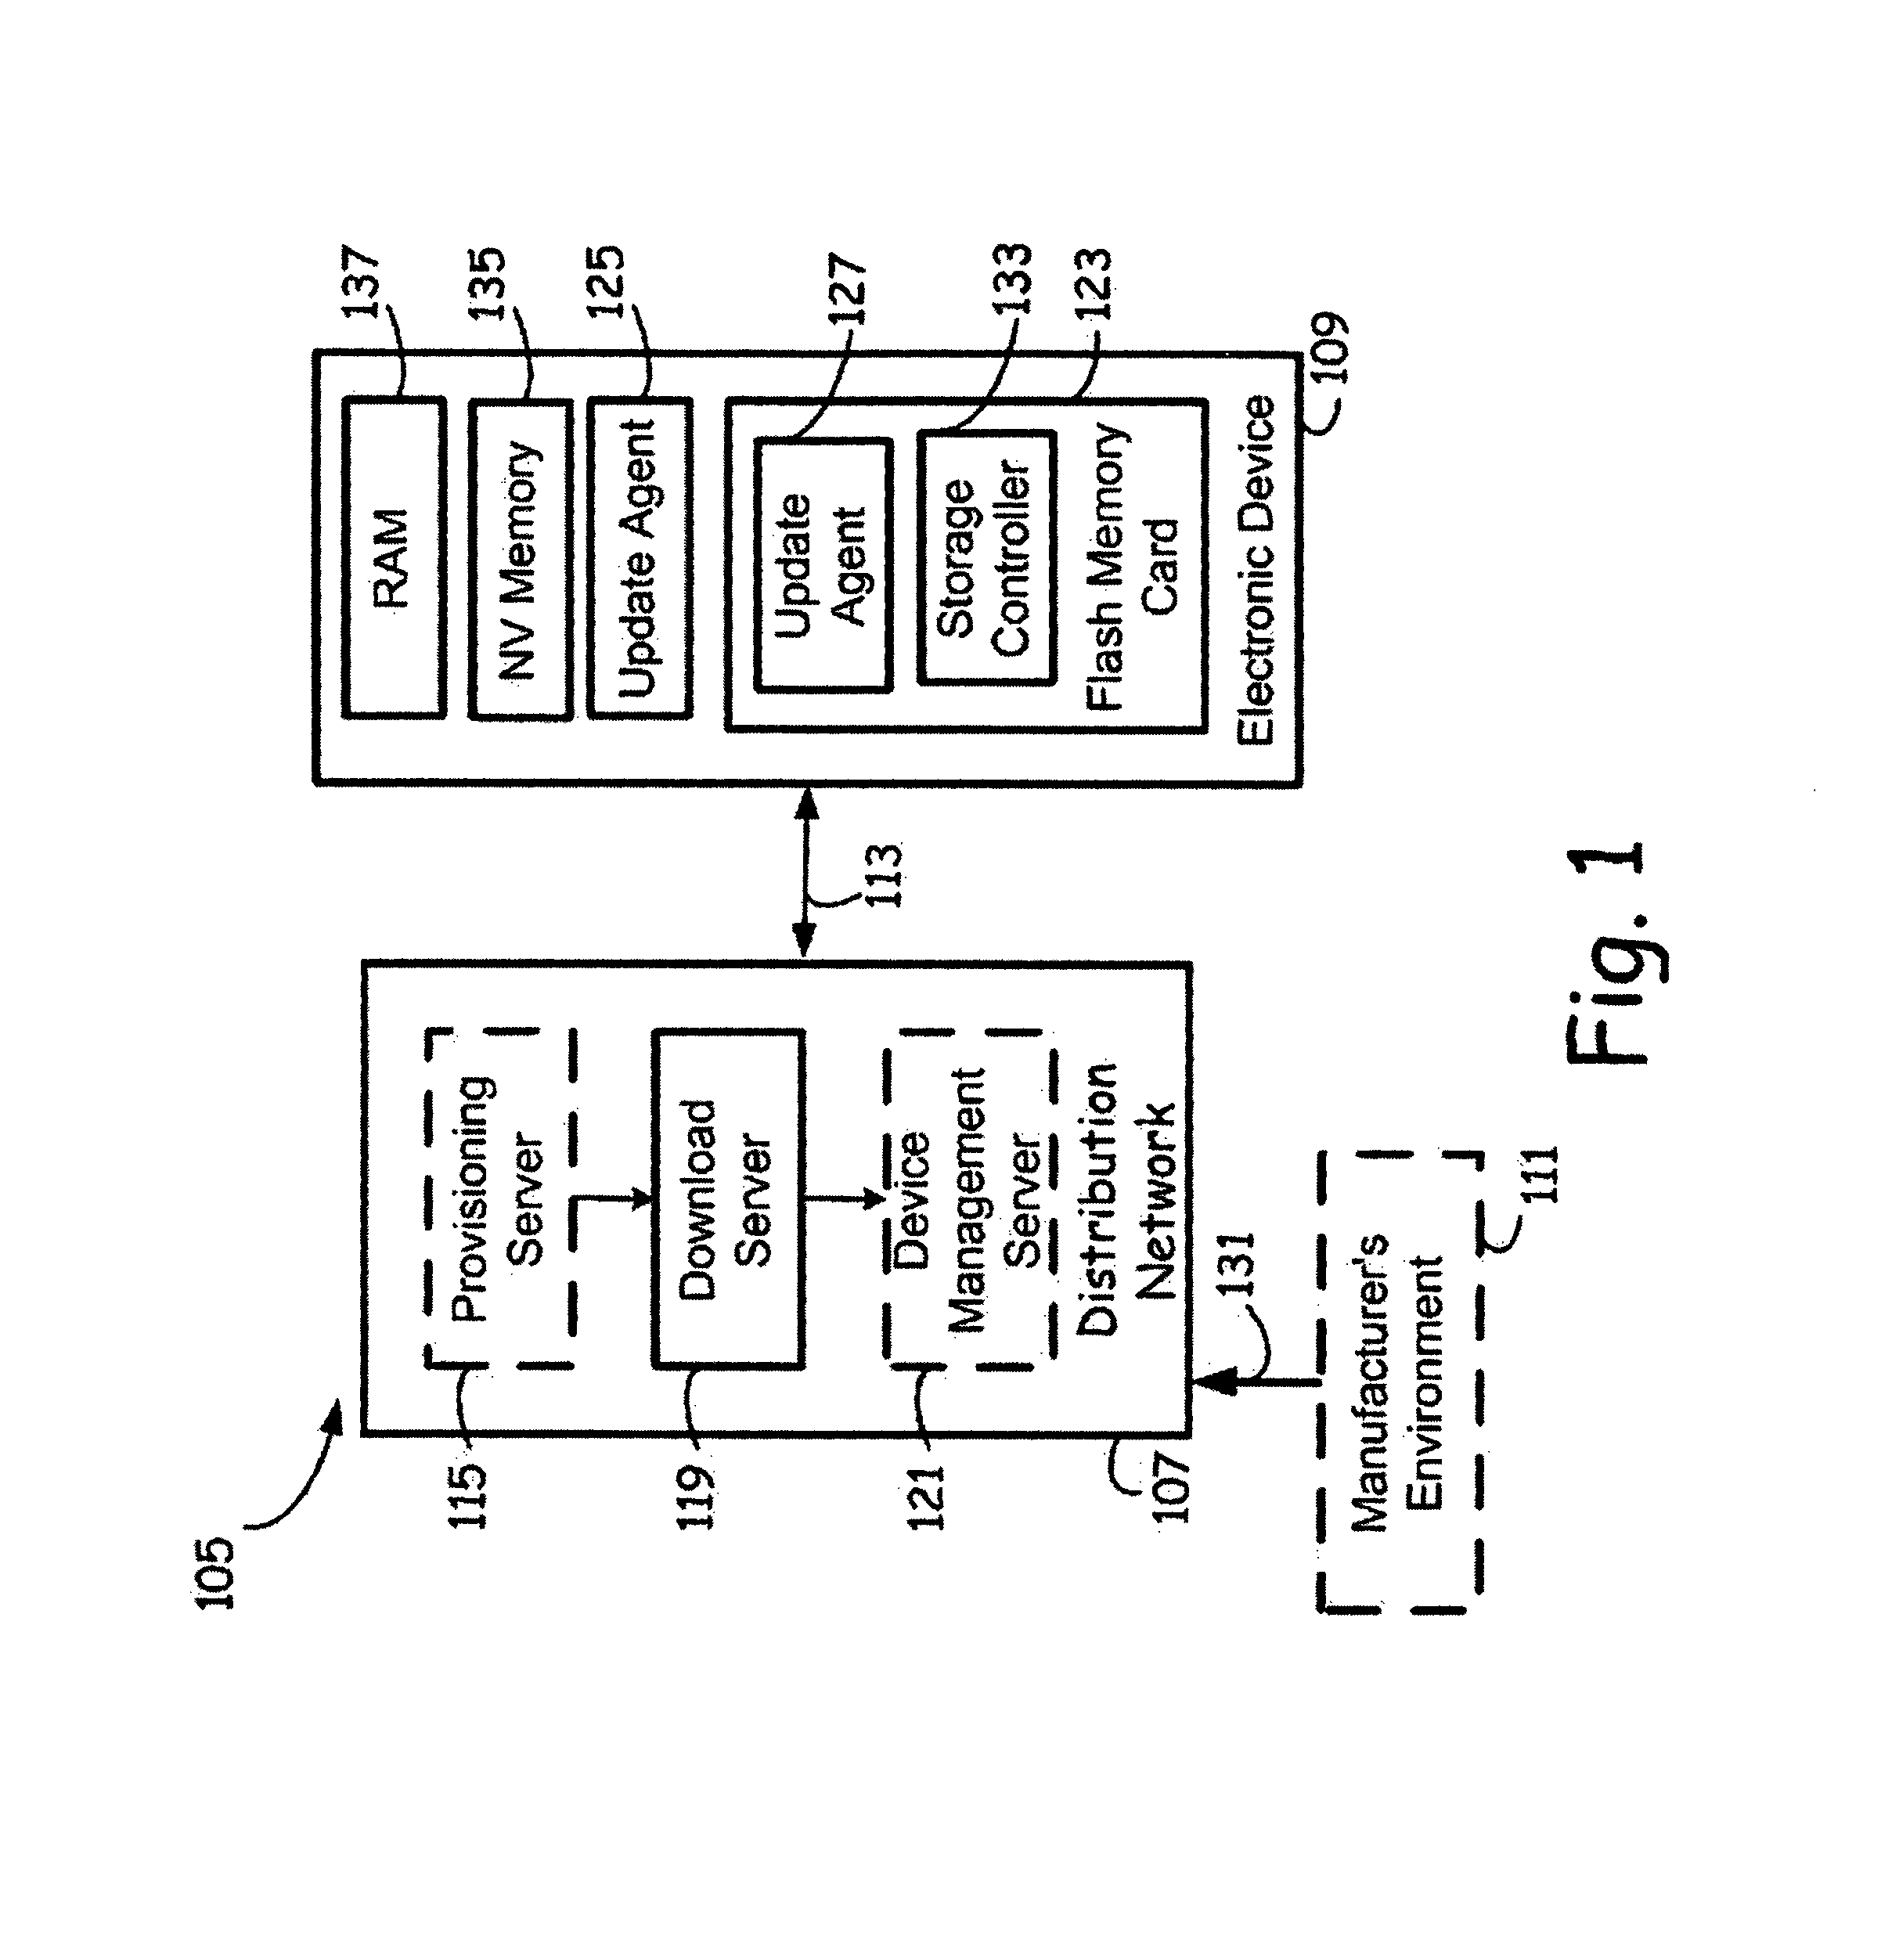 Firmware update in electronic devices employing update agent in a flash memory card